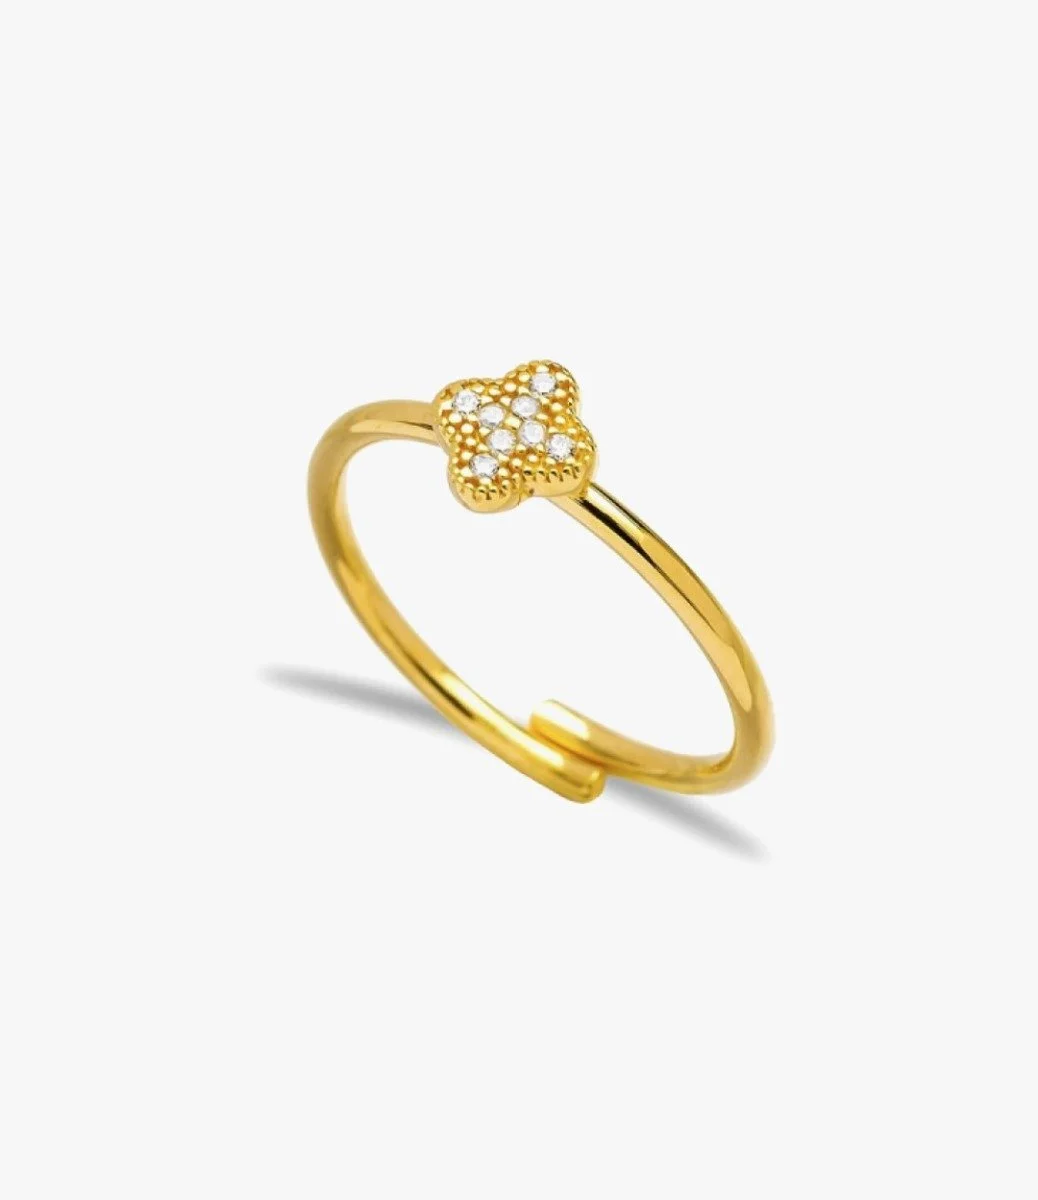 Flower-shaped Gold-plated Ring Paved With Zirconium by NAFEES